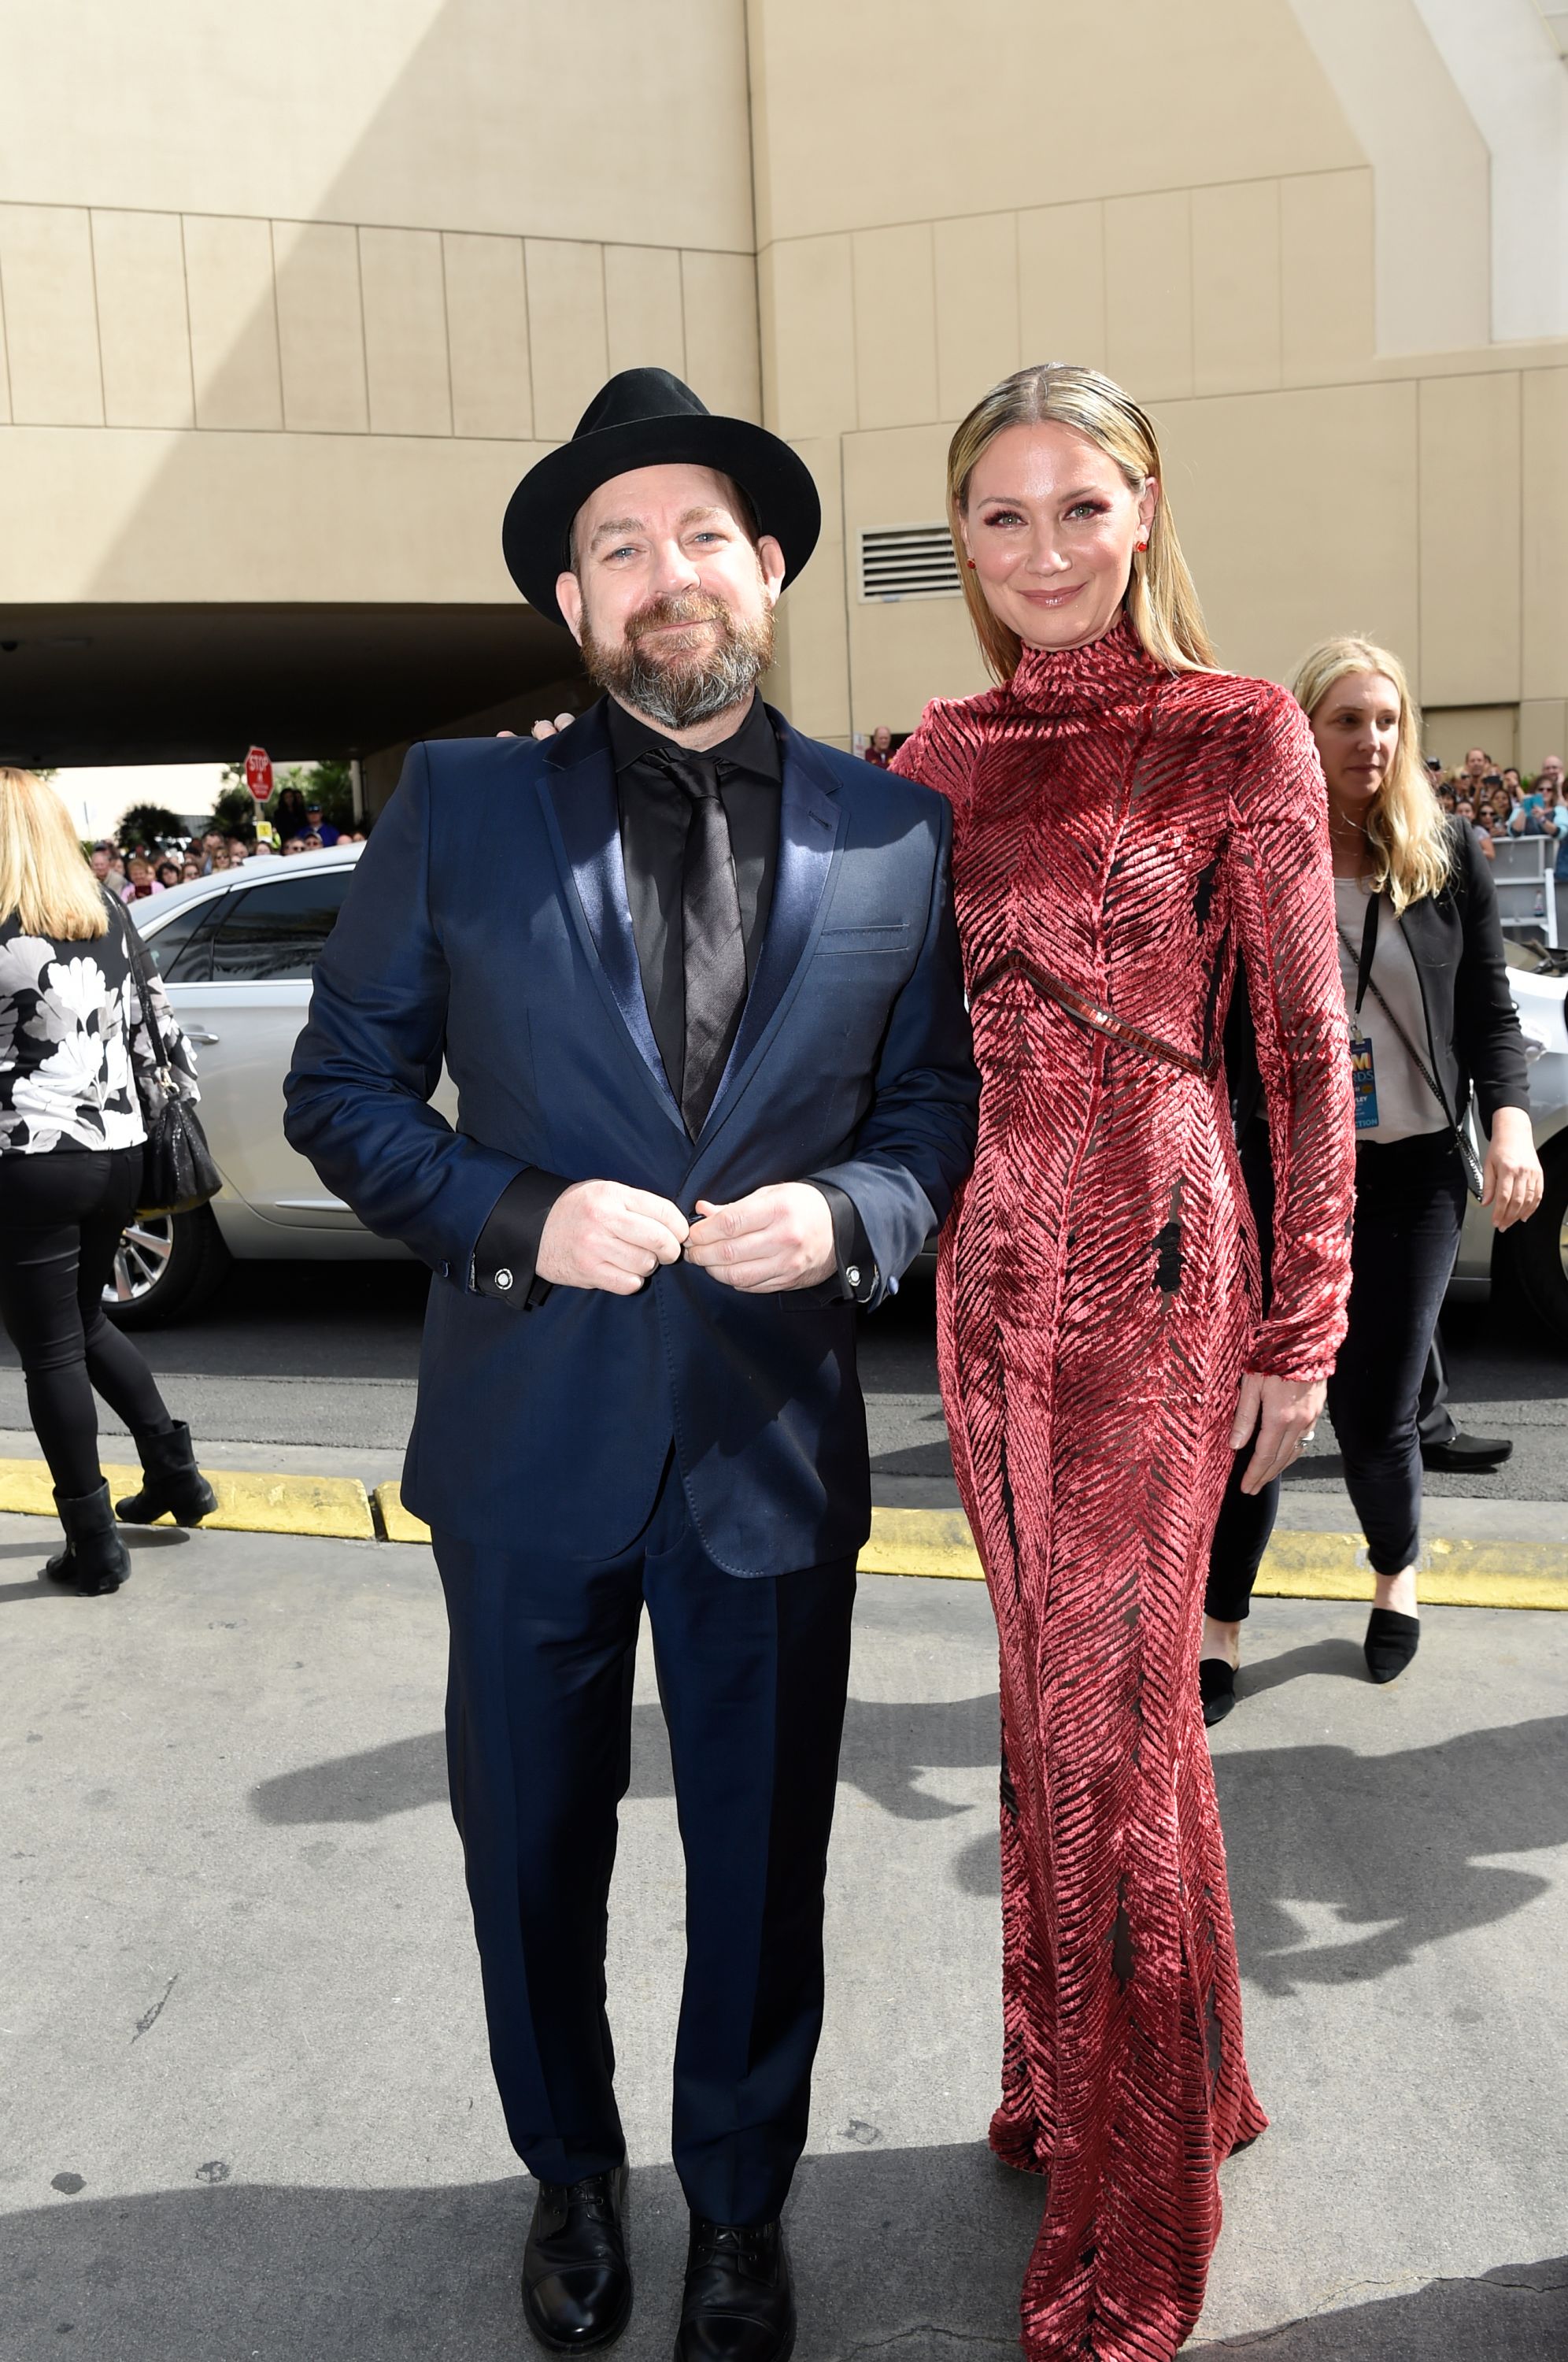 Justin Miller and Jennifer Nettles at the 53rd Academy of Country Music Awards in Las Vegas on April 15, 2018 | Photo: Michele Crowe/CBS/Getty Images